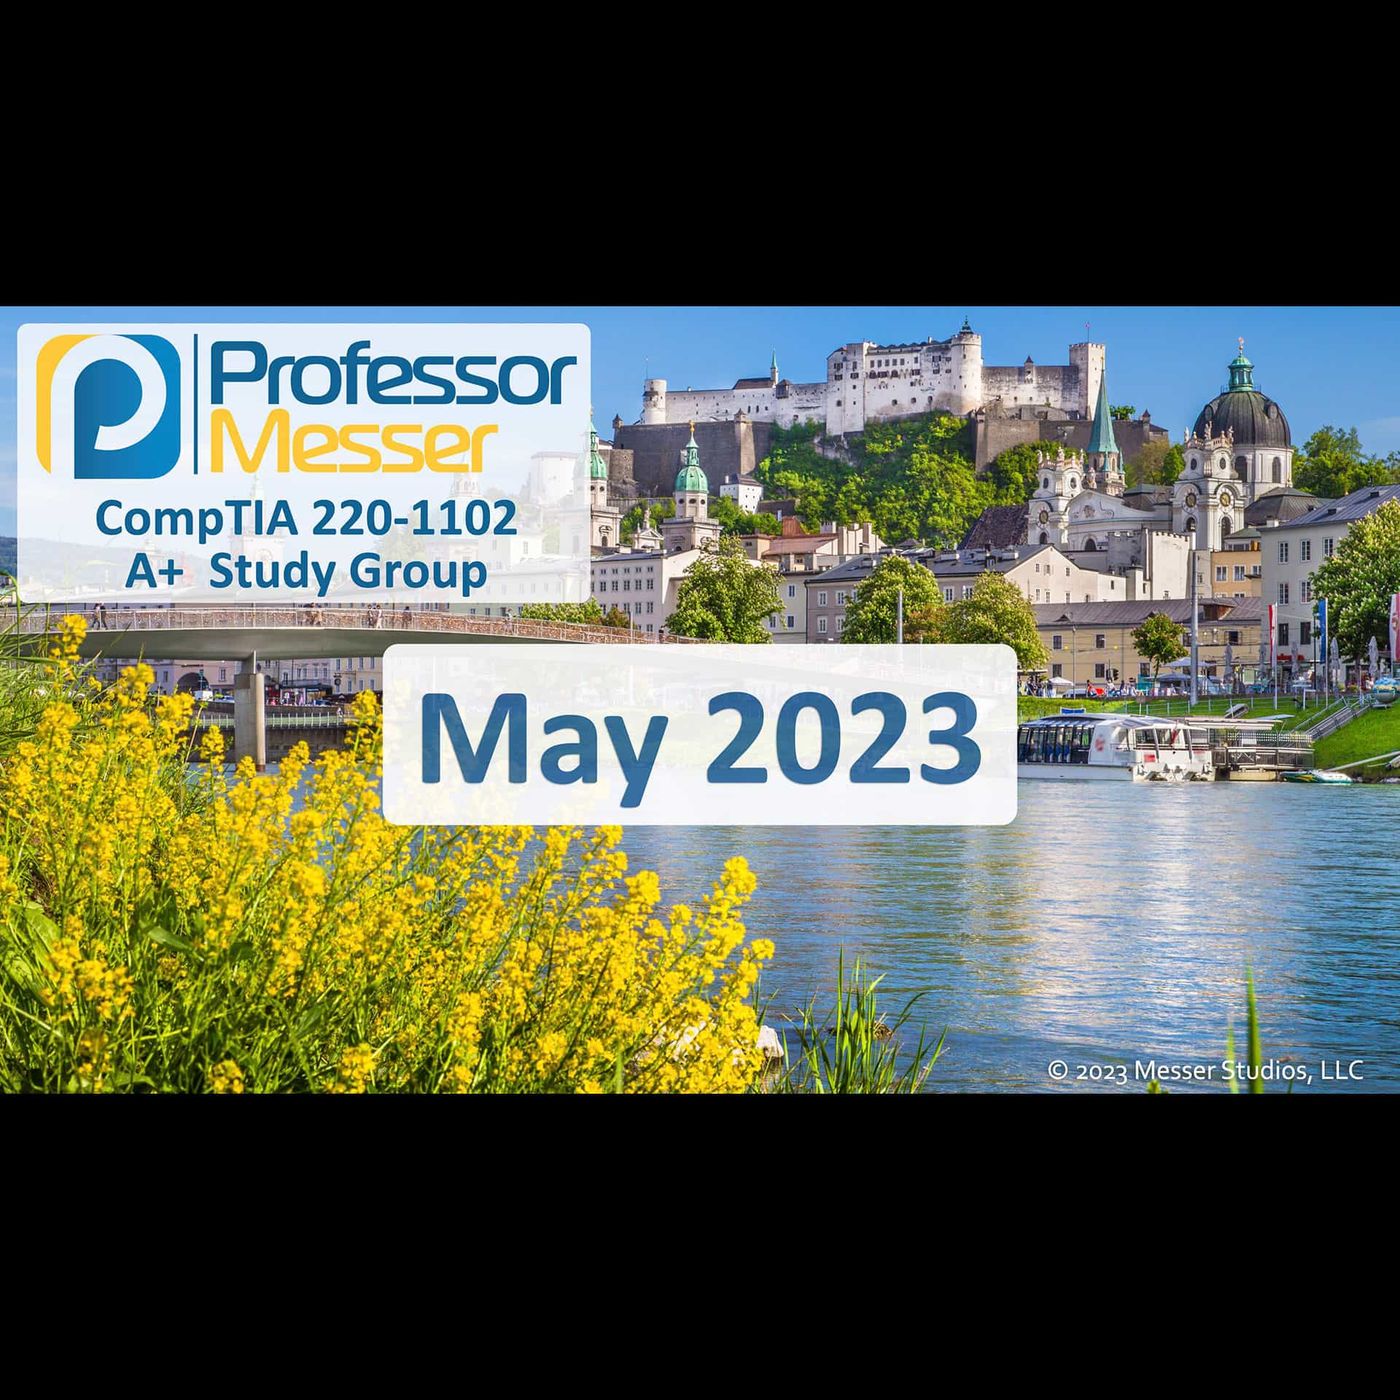 Professor Messer's CompTIA 220-1102 A+ Study Group - May 2023